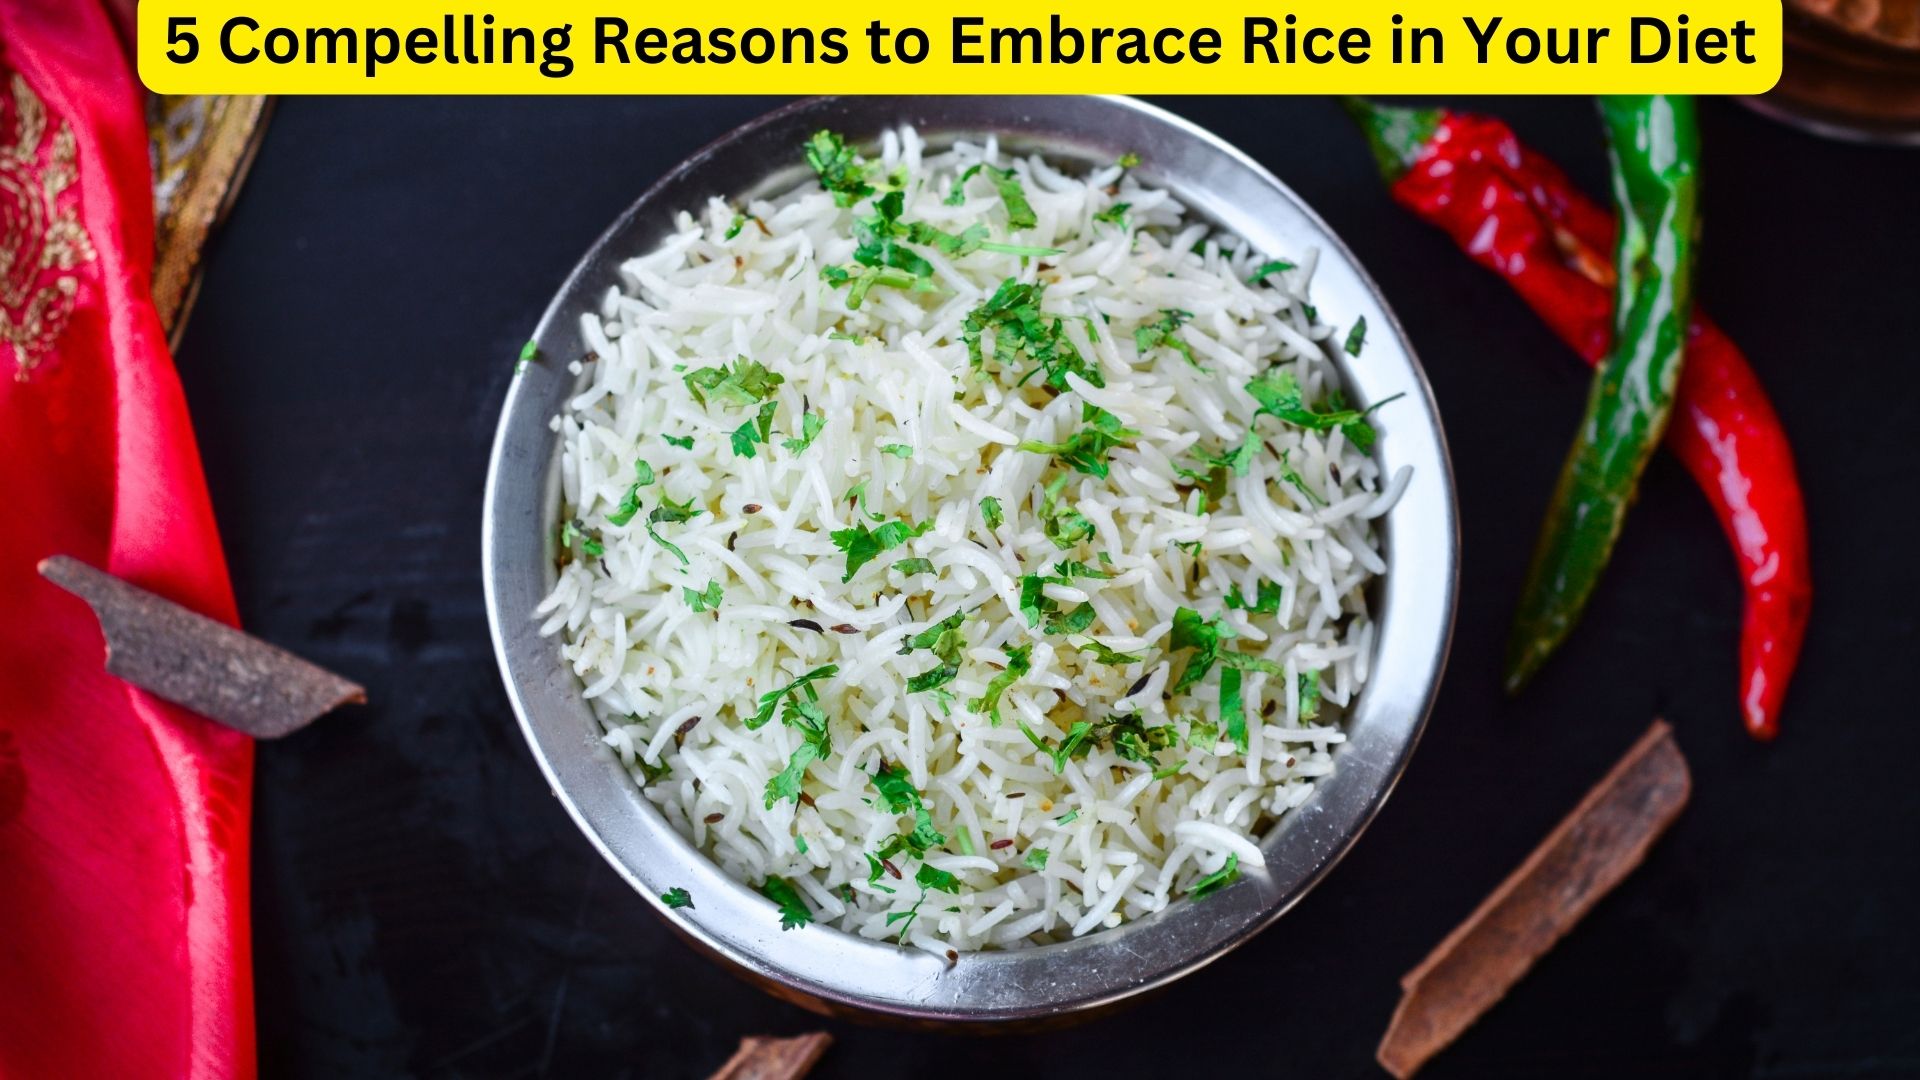 5 Compelling Reasons to Embrace Rice in Your Diet